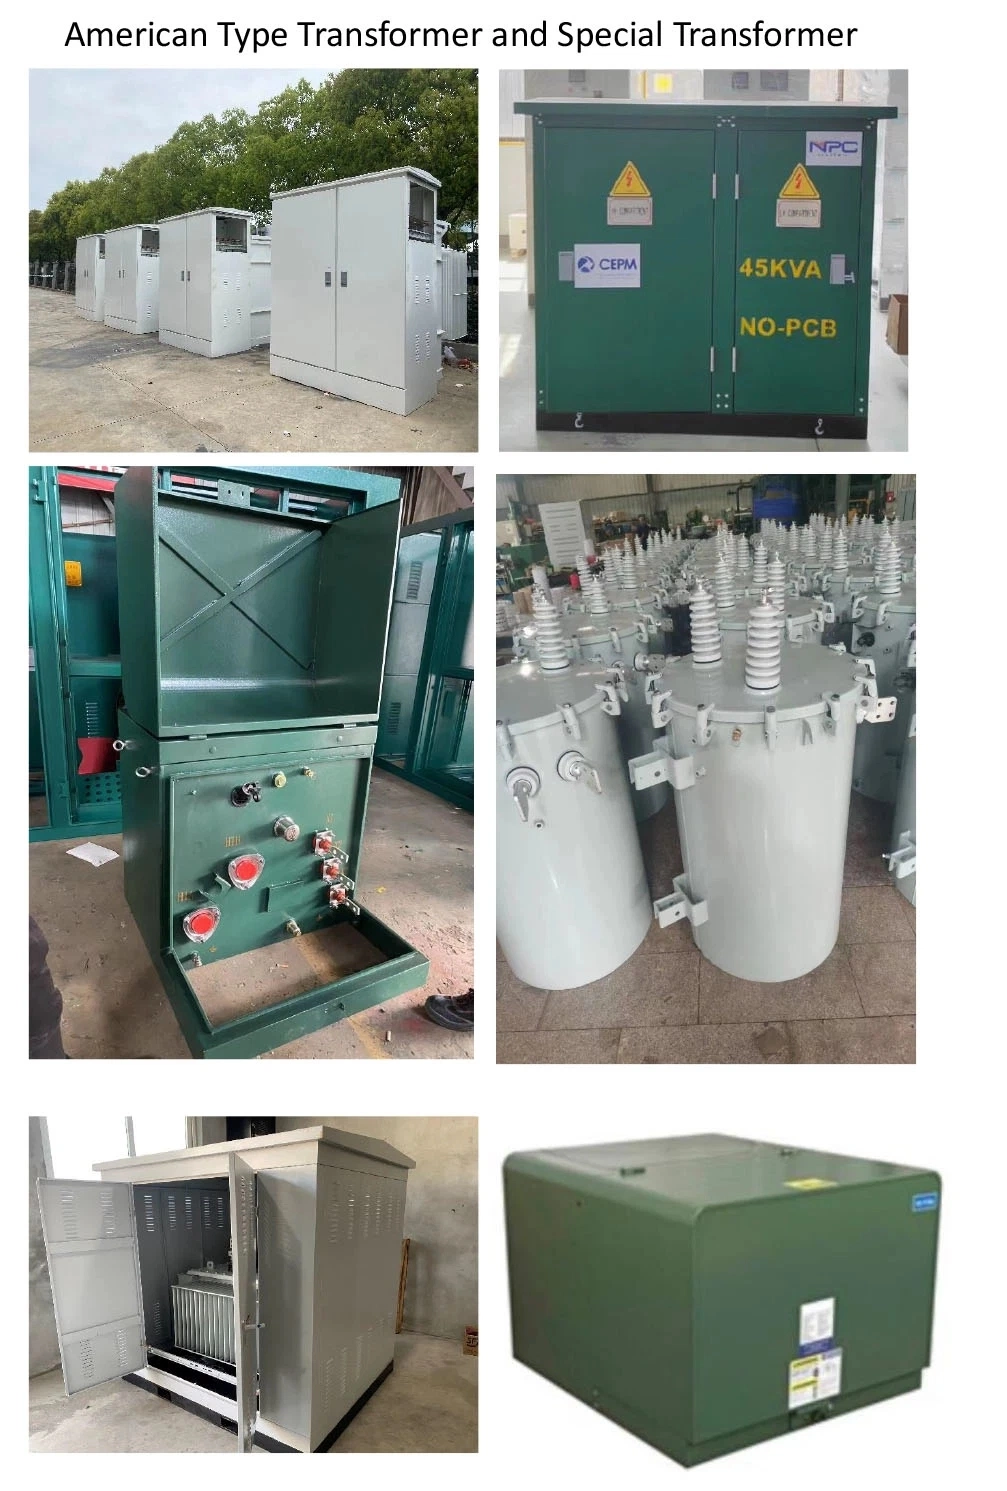 Zgs11 American Oil Tank Immersed Box-Type Prefabricated Substation for Pad Mounted Transformer